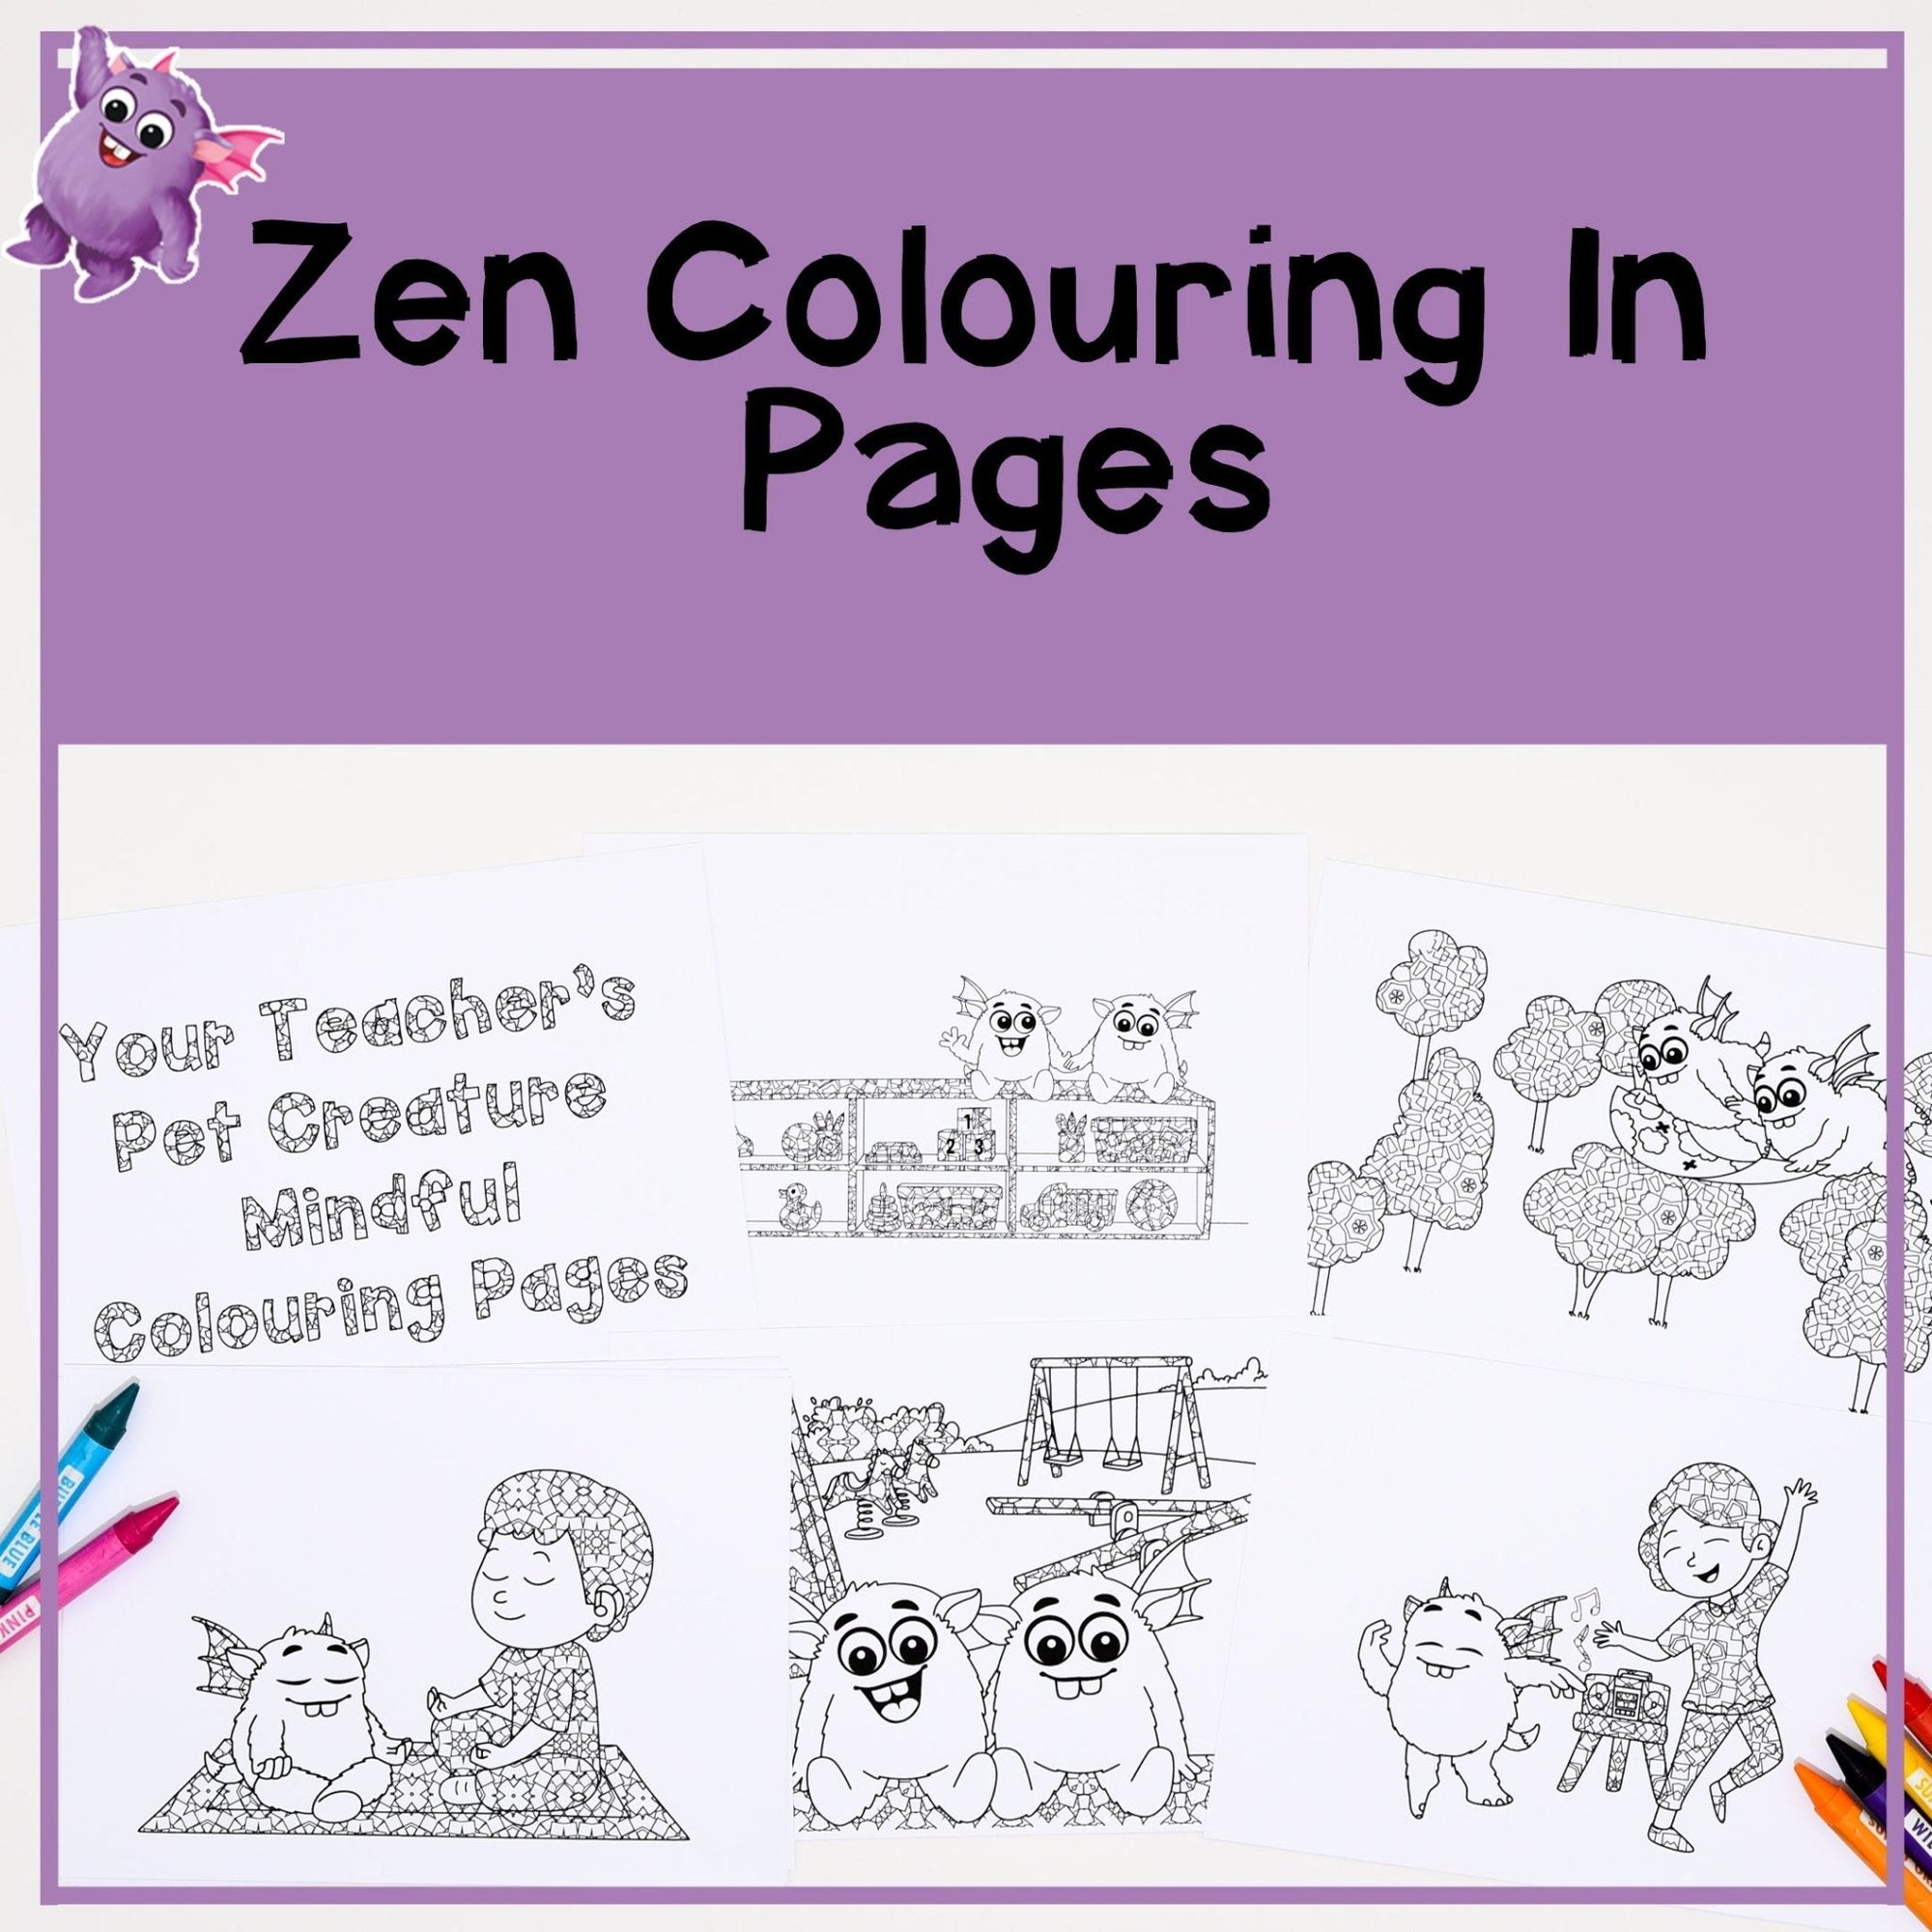 Zen Colouring Pages for Mindfulness and Calming - Your Teacher's Pet Creature